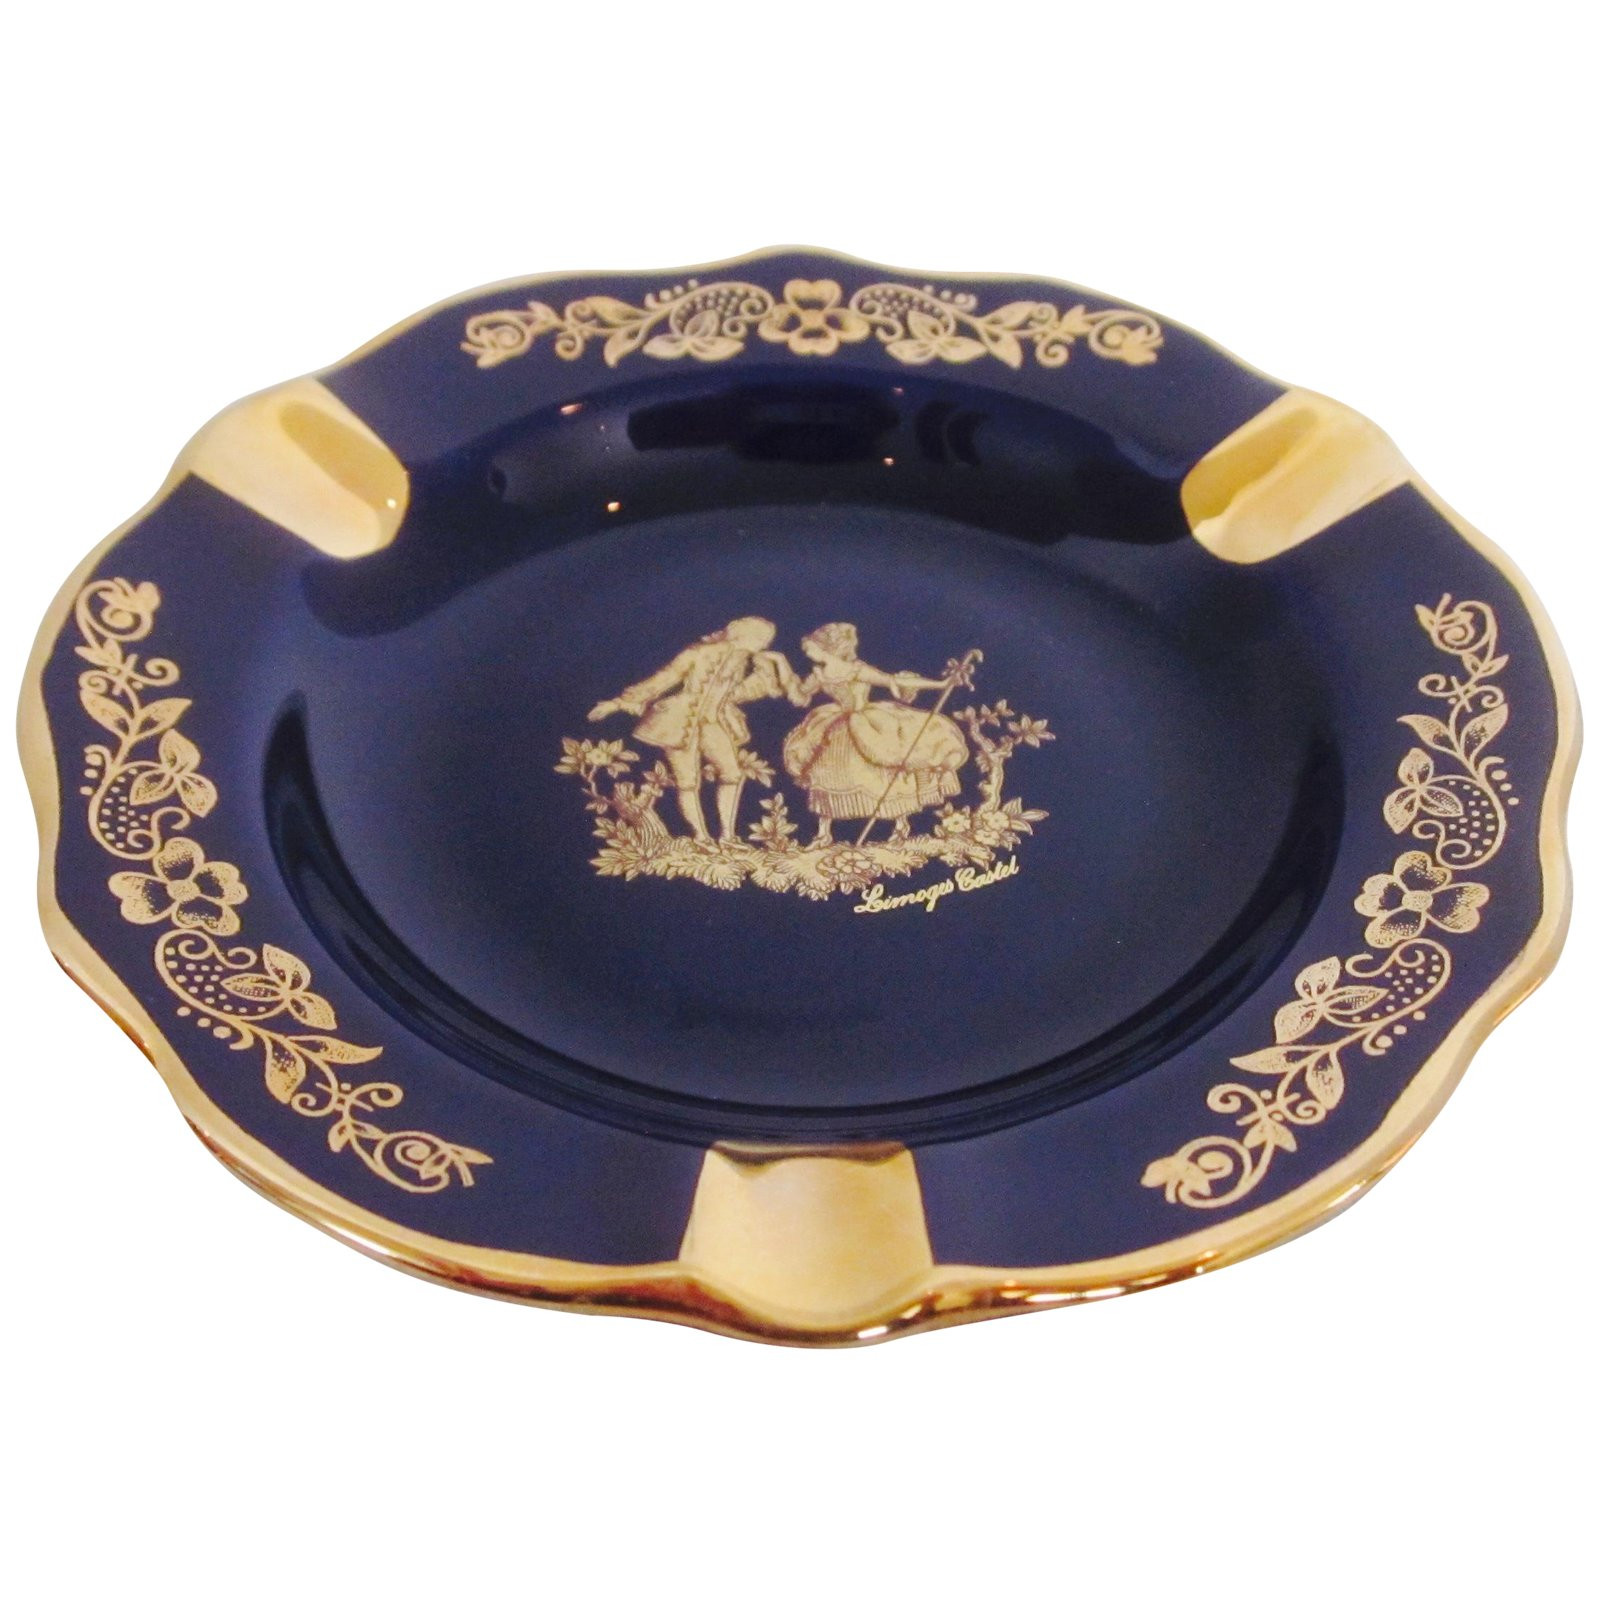 Limoges Vase Prices Of French Limoges ashtray Dish 22k Gold Chairish Throughout French Limoges ashtray Dish 22k Gold 0875